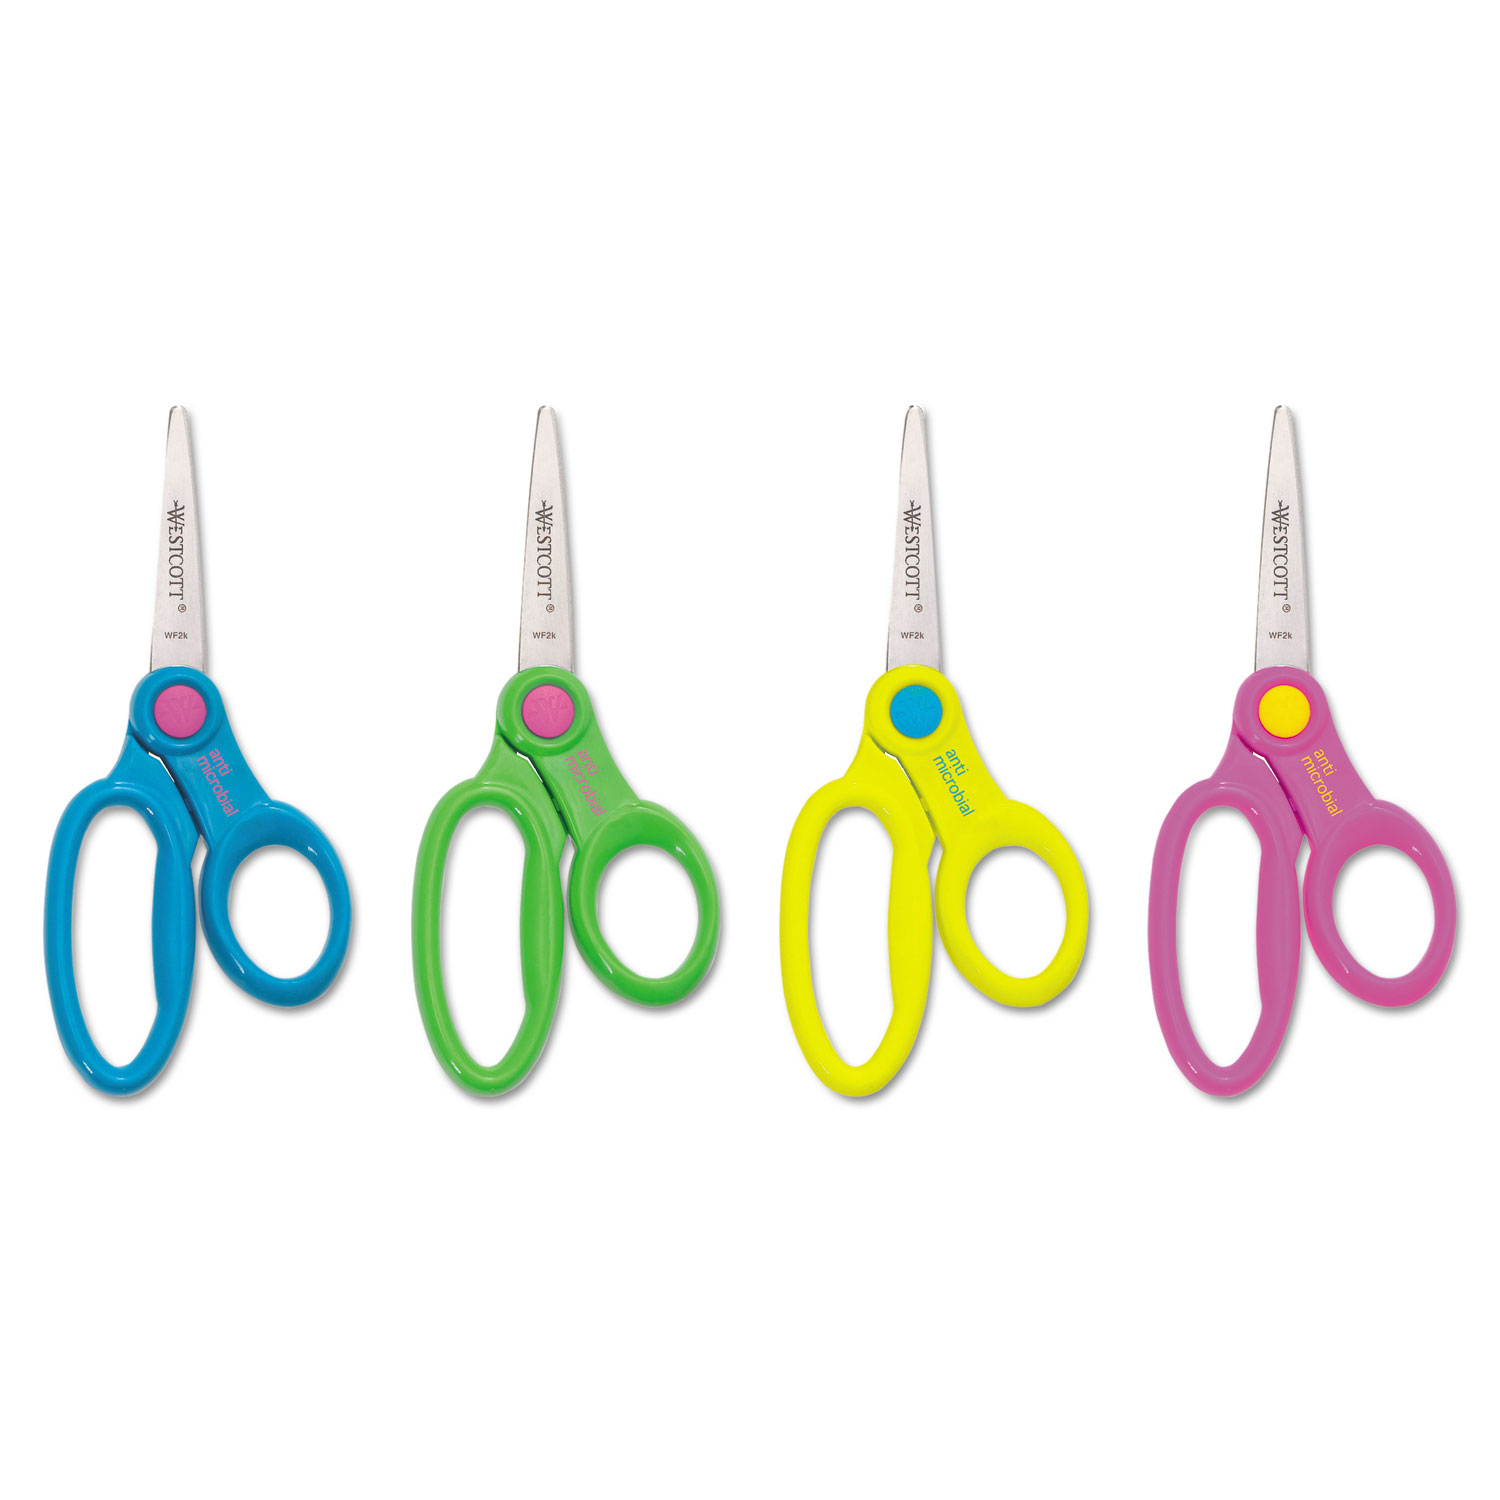  Westcott 14607 Kids' Scissors with Antimicrobial Protection, Pointed Tip, 5 Long, 2 Cut Length, Randomly Assorted Straight Handles (ACM14607) 